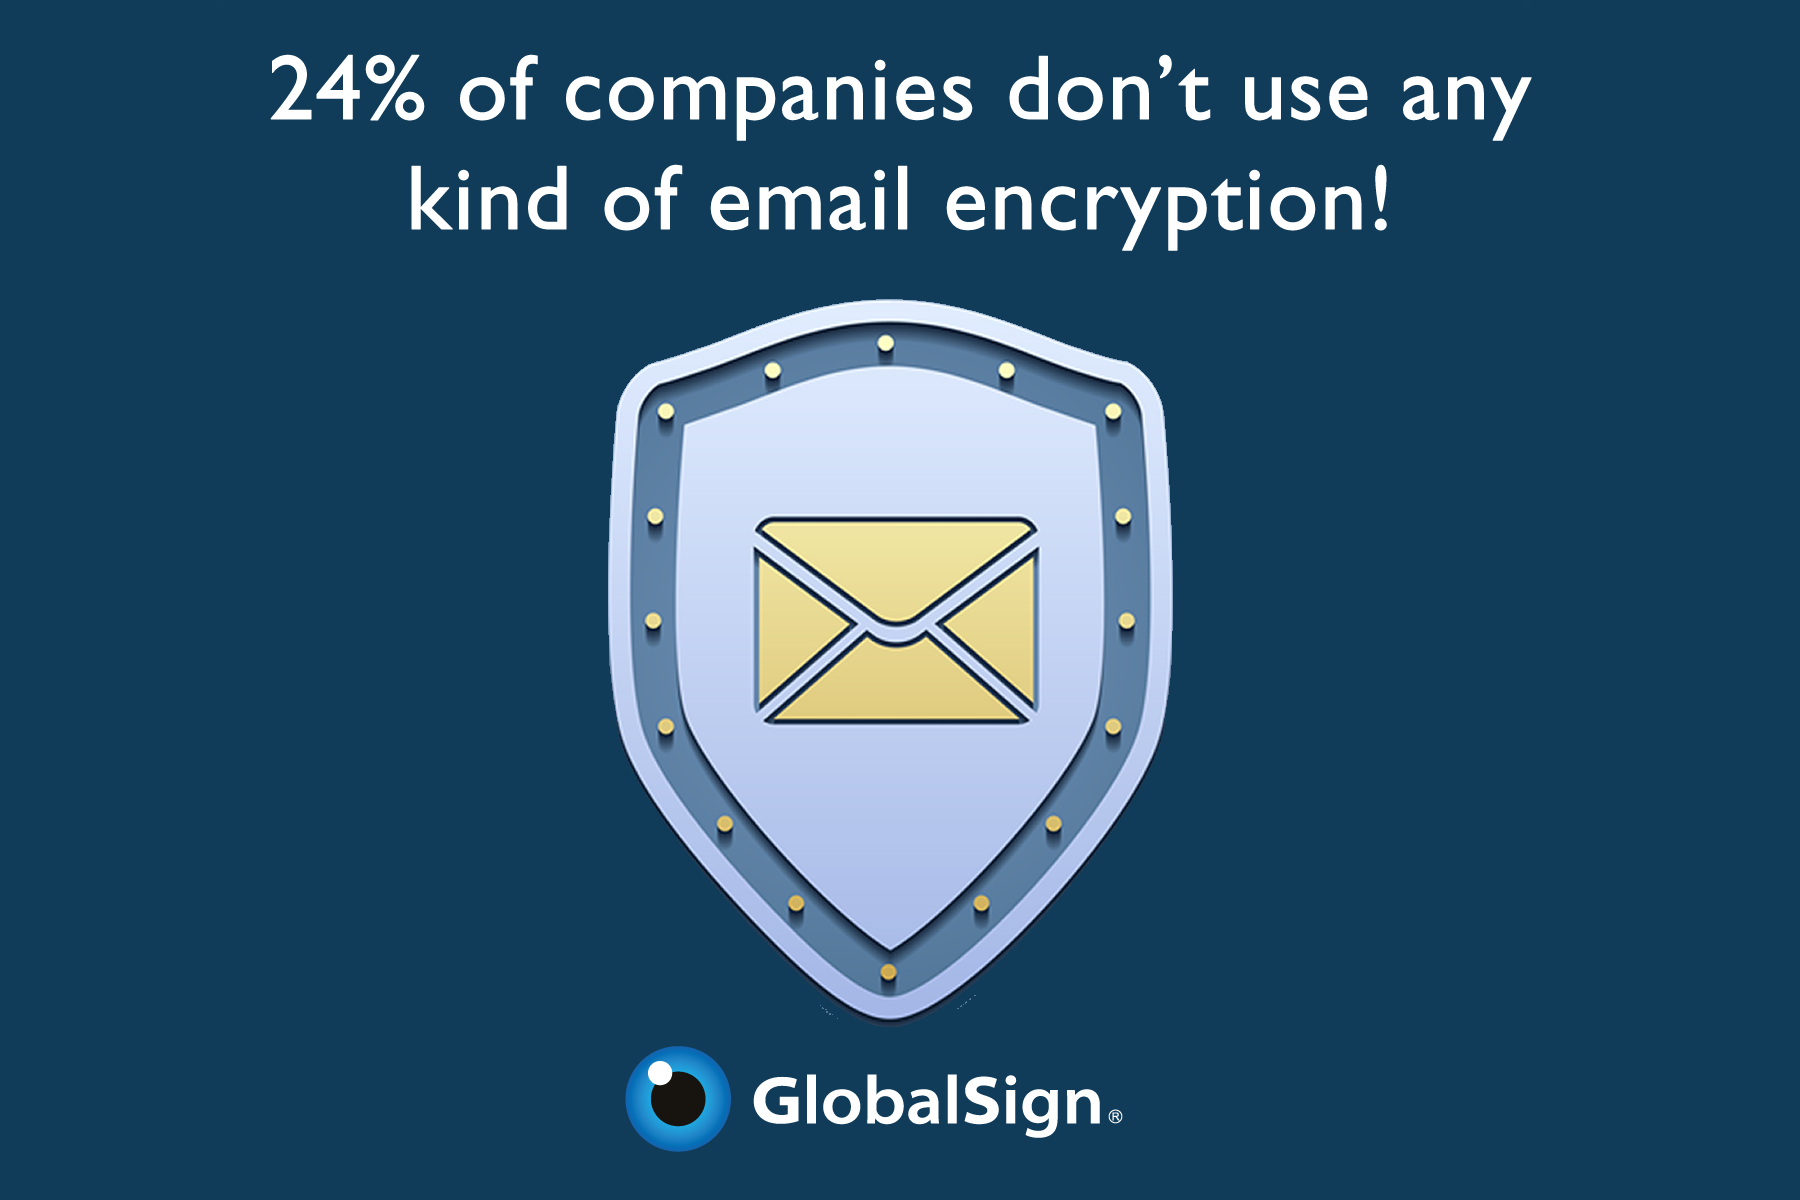  24_of_companies_dont_use_any_kind_of_email_encryption_LN.fw.png 